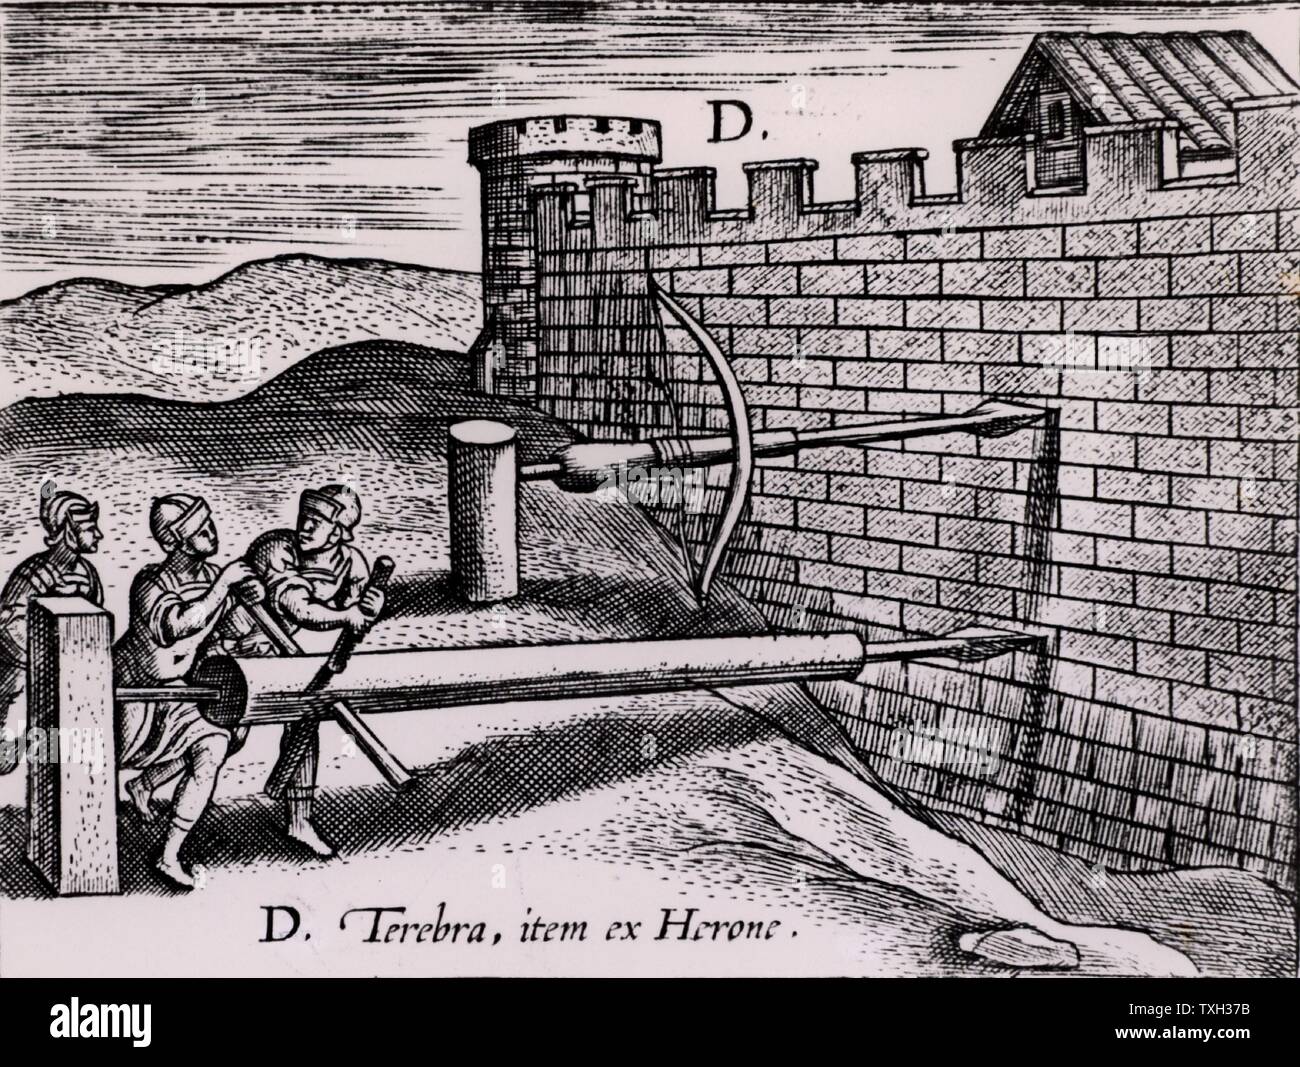 Two forms auger used by the Romans in siege warfare to drill into the wall of a fortress.  From "Poliorceticon sive de machinis tormentis telis" by Justus Lipsius (Joost Lips) (Antwerp, 1605). Engraving. Stock Photo